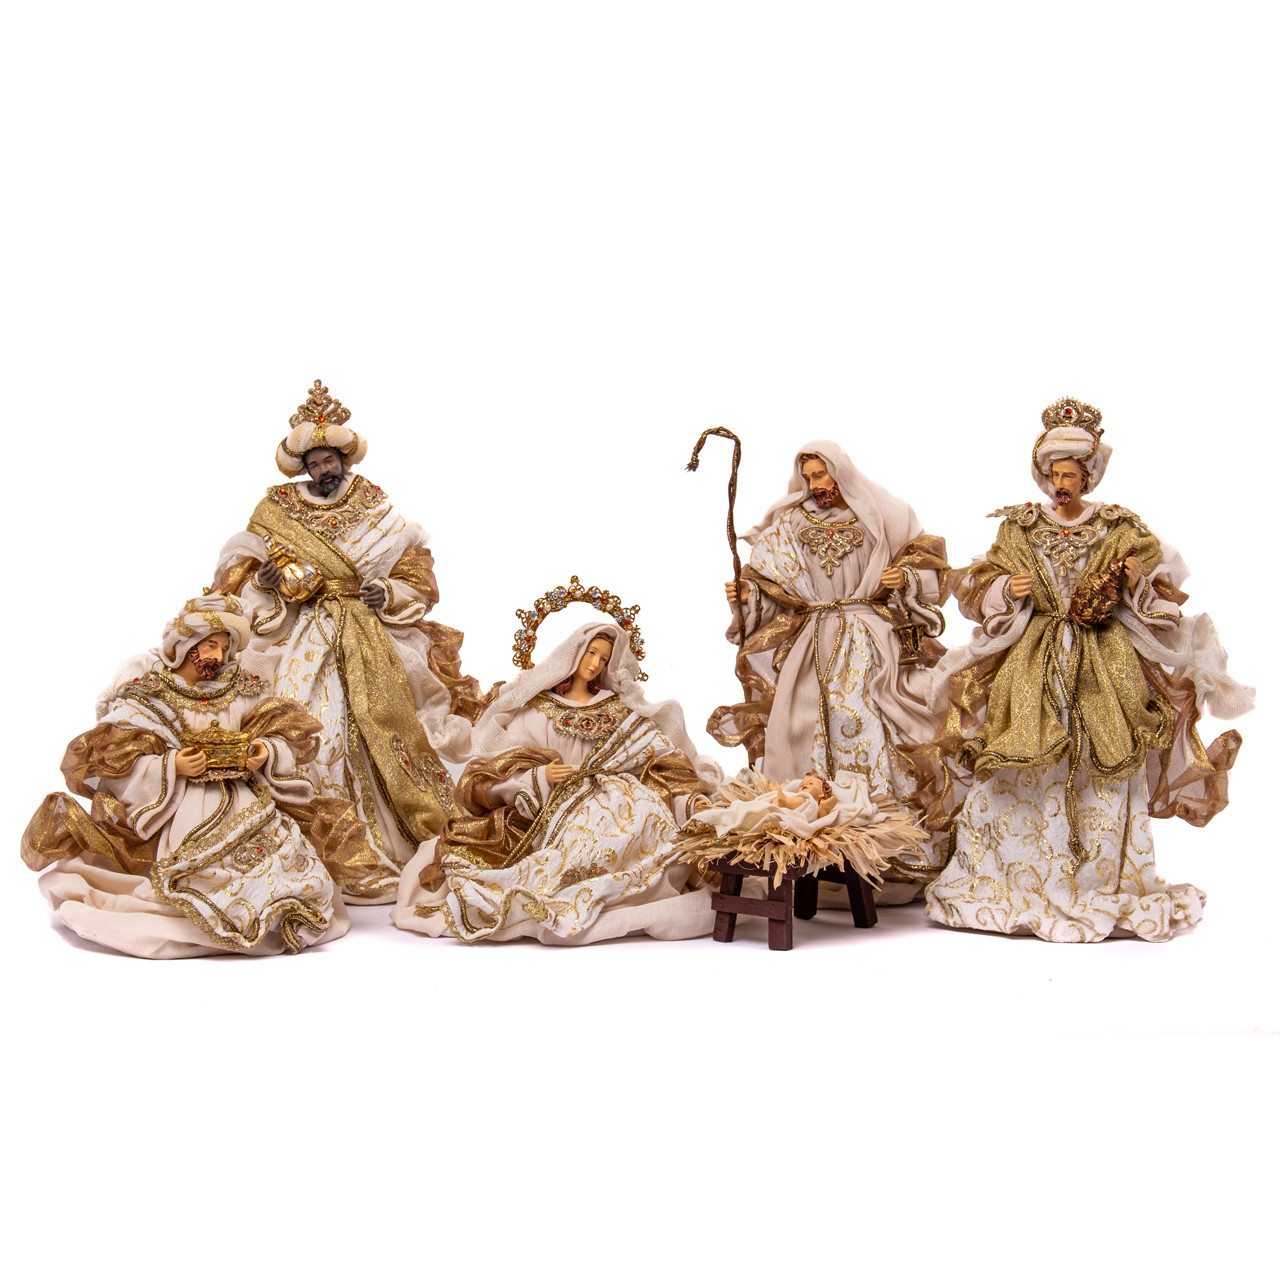 14 in. Beige & Gold Holy Family Wise Men Nativity 